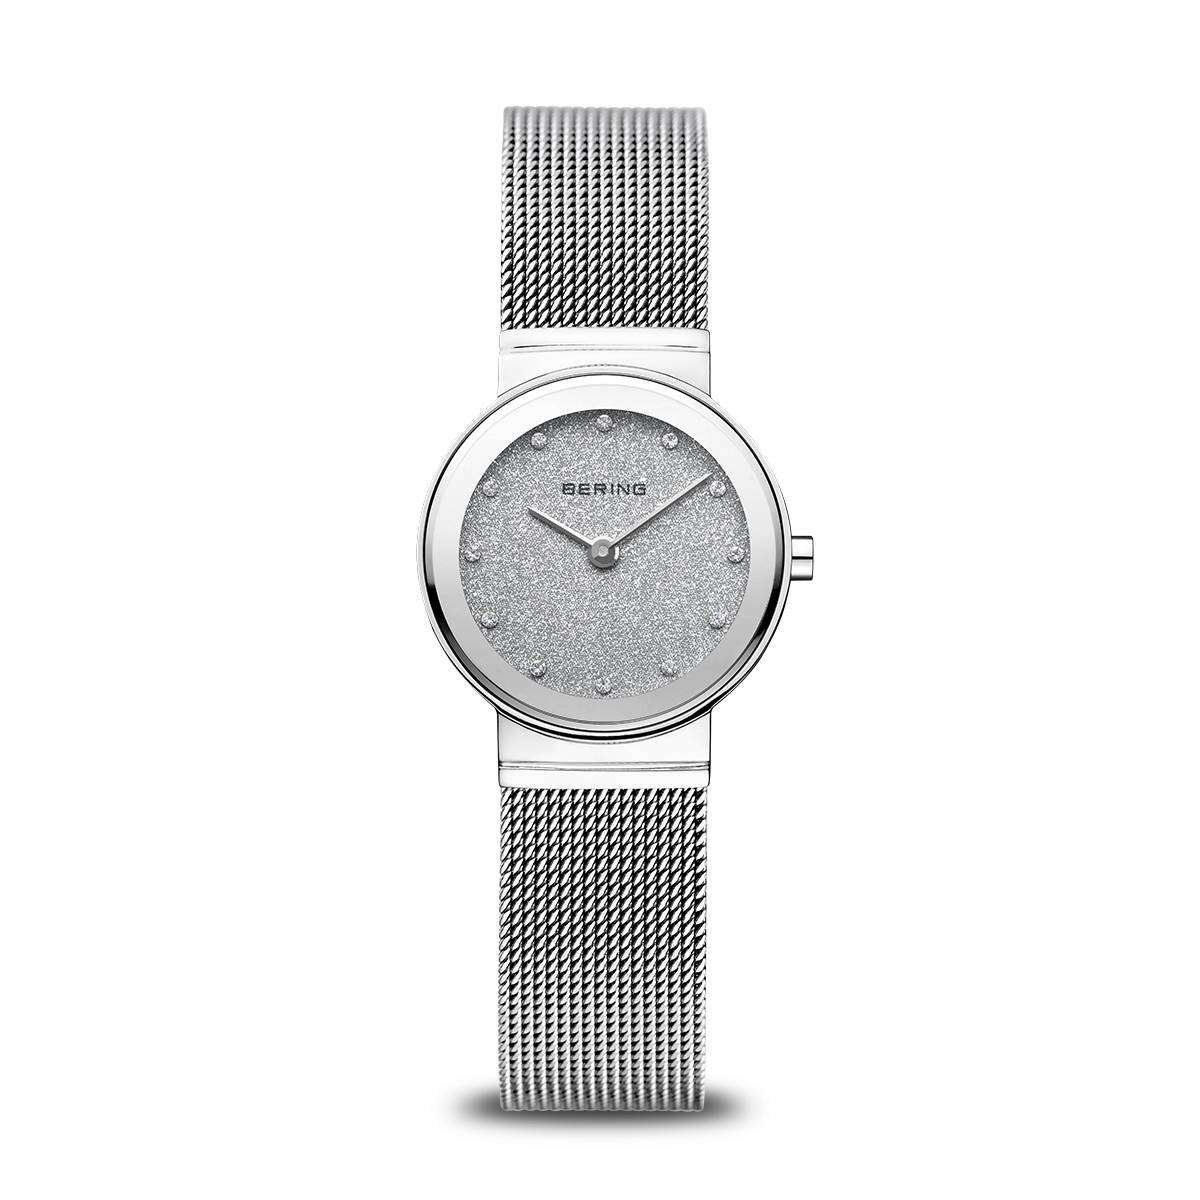 Bering Classic Ladies Watch in Silver Sparkle 10126-0003